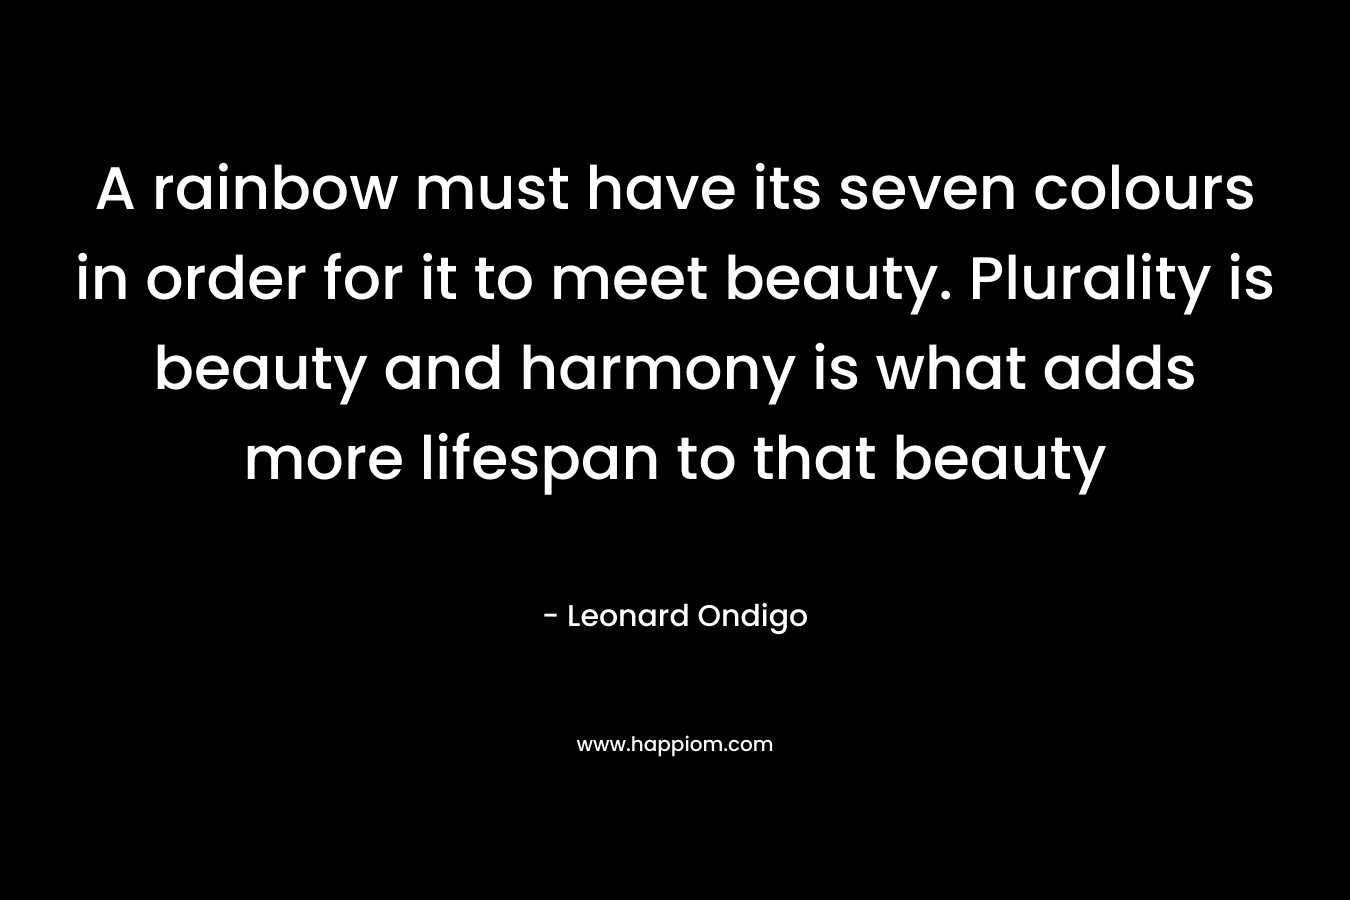 A rainbow must have its seven colours in order for it to meet beauty. Plurality is beauty and harmony is what adds more lifespan to that beauty – Leonard Ondigo